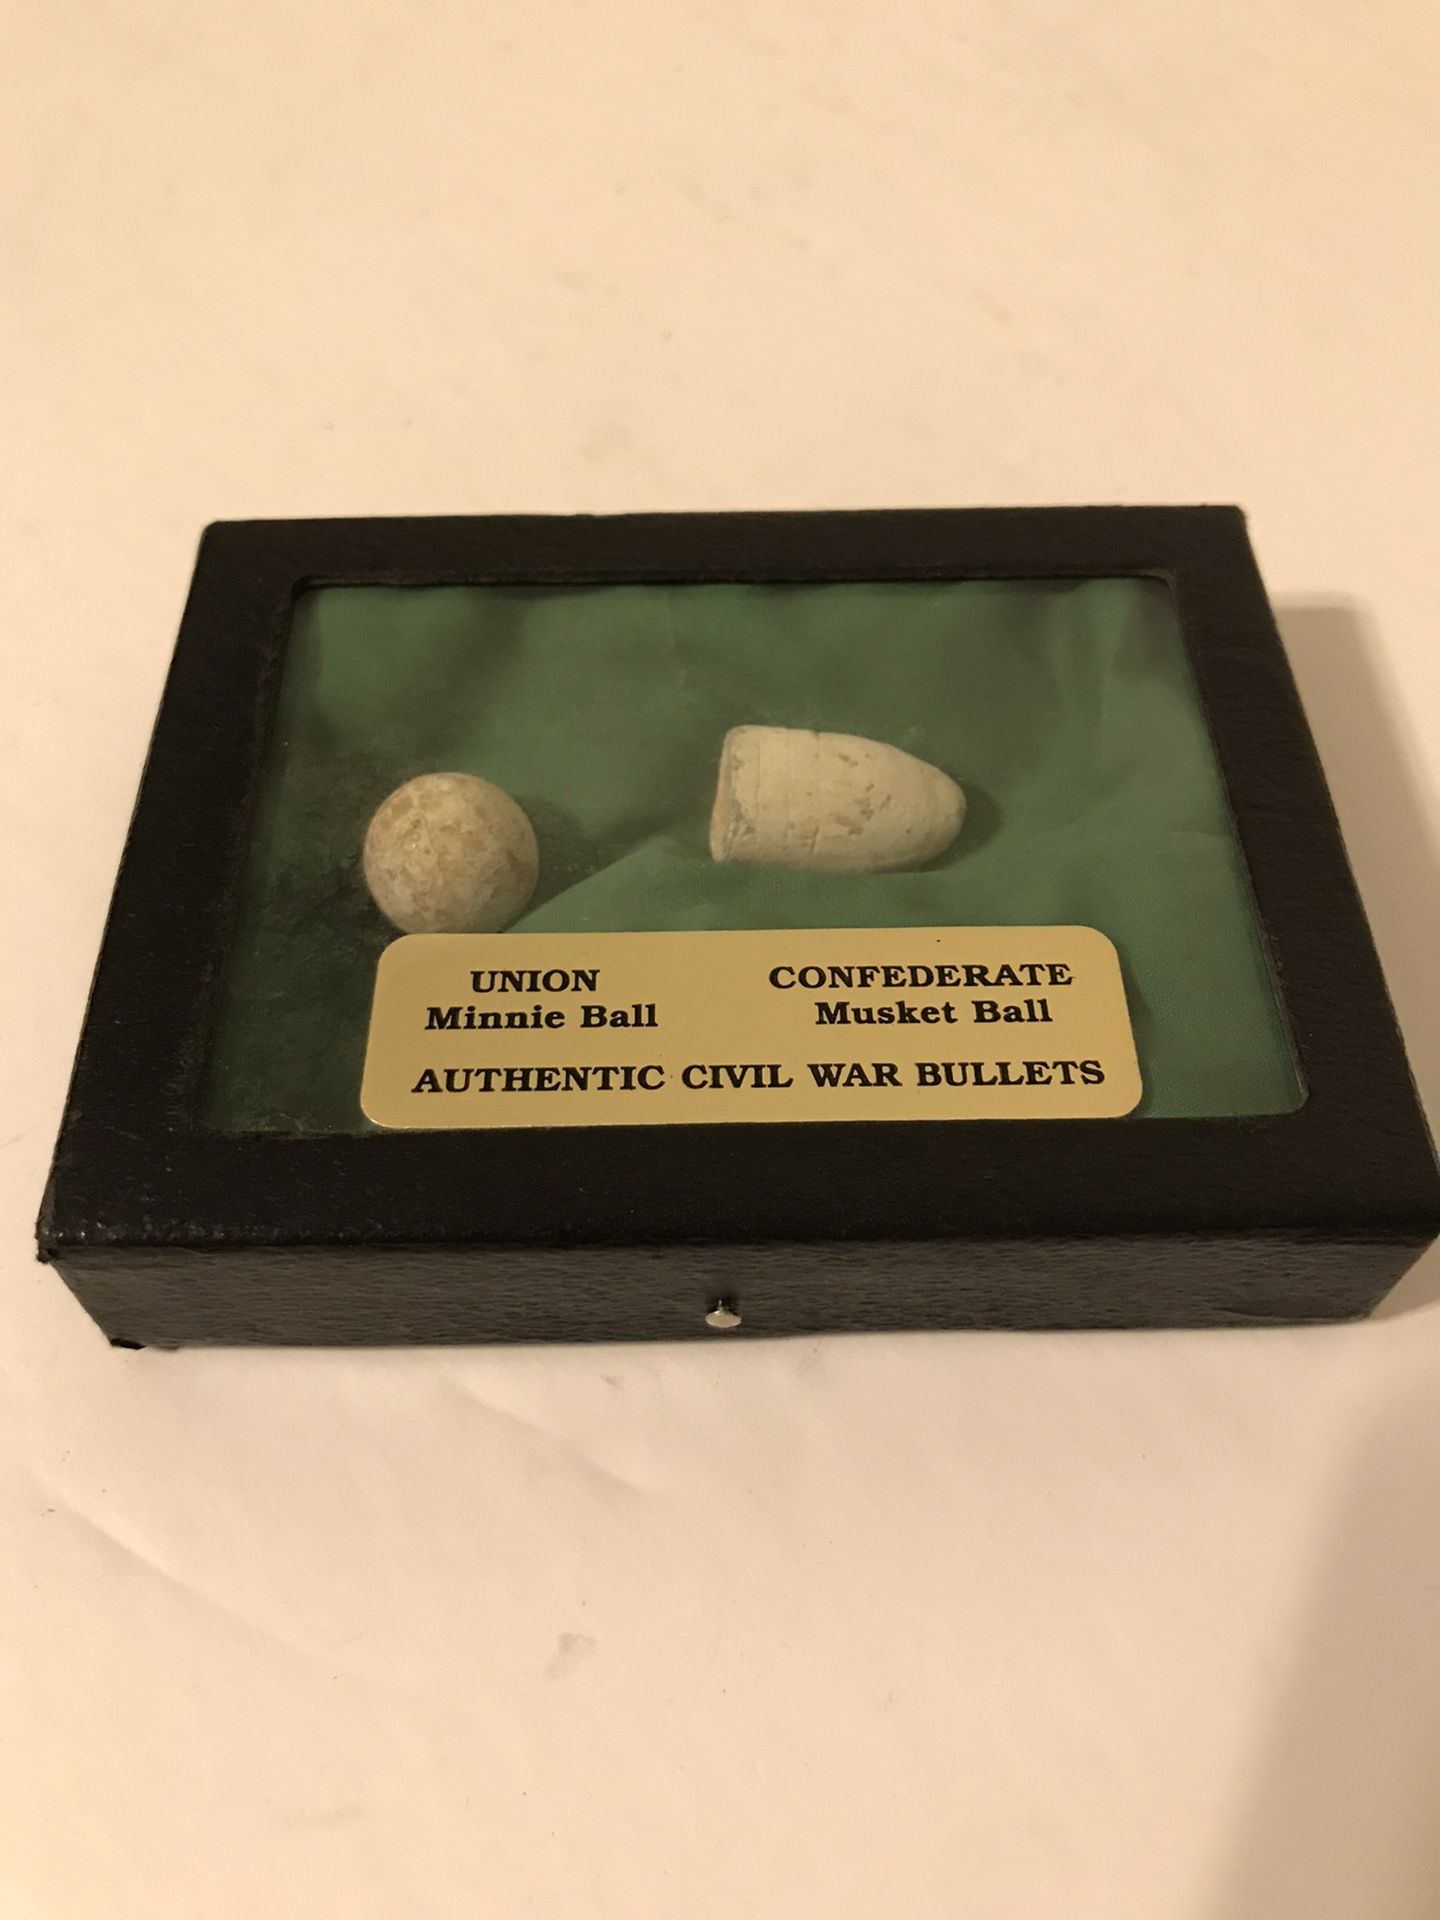 Vintage Authentic Civil War Bullets from both Union & Confederate Armies